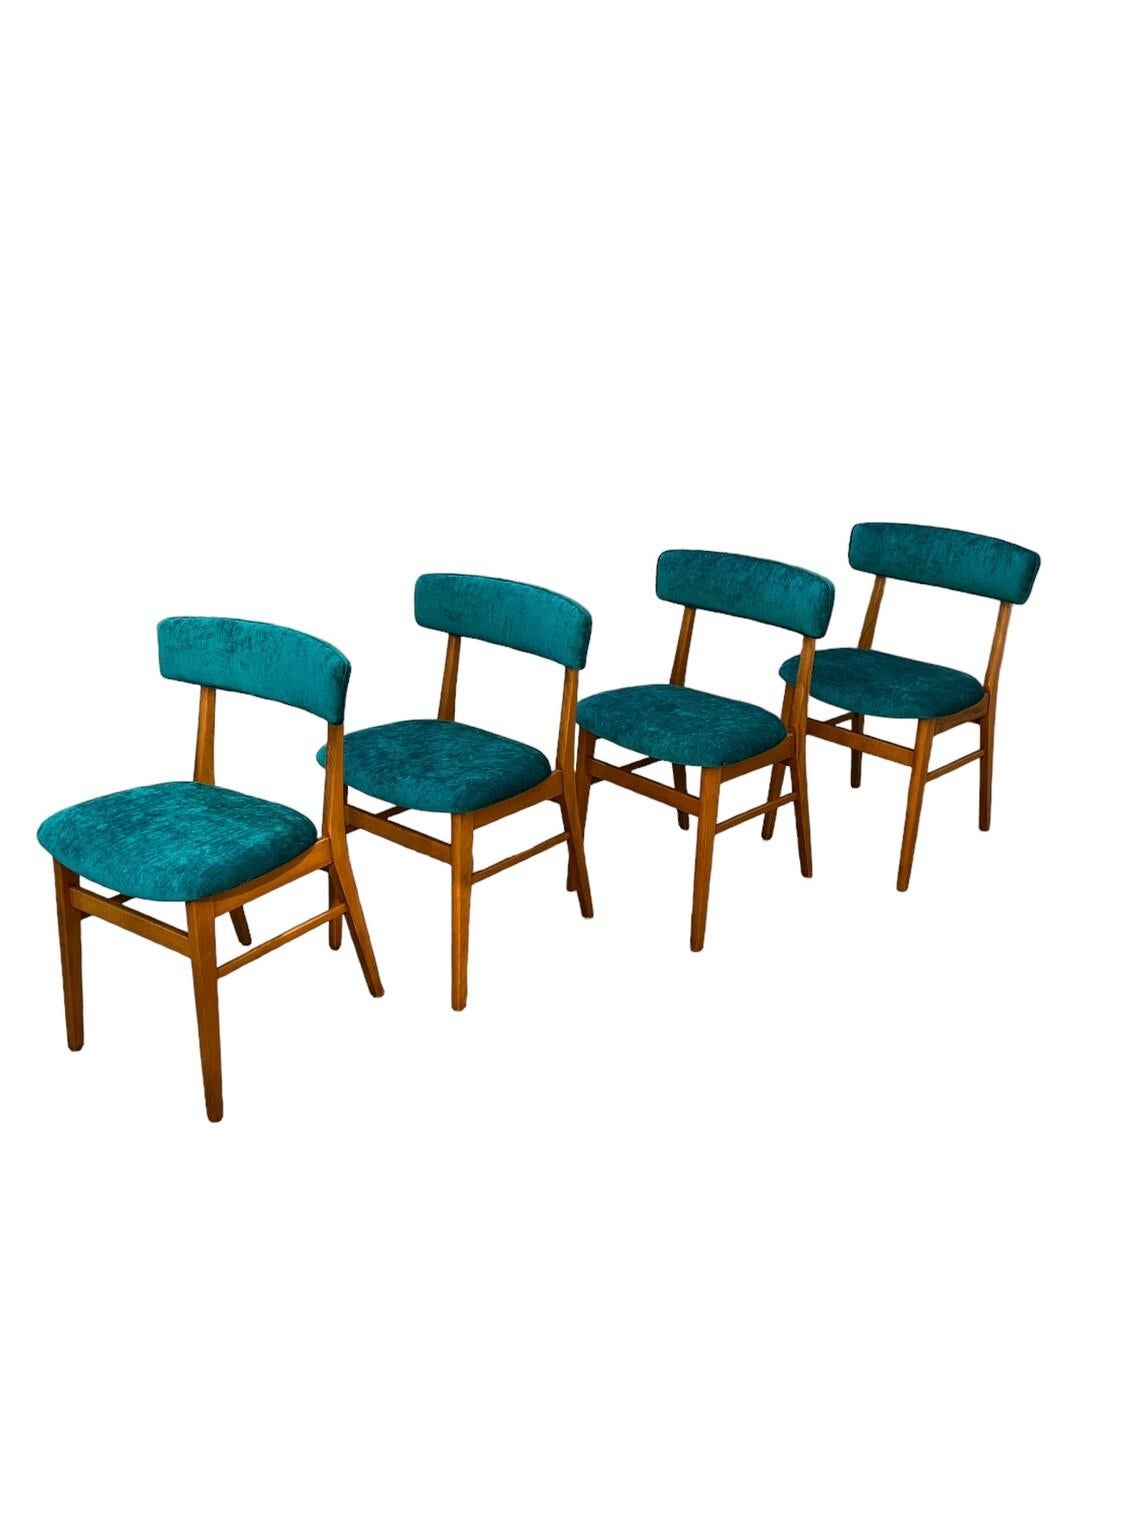 Mid Century danish teak, dining chairs set of 4 with new blue teal velvet Upholstery. 1960’s 
Dimensions: W19